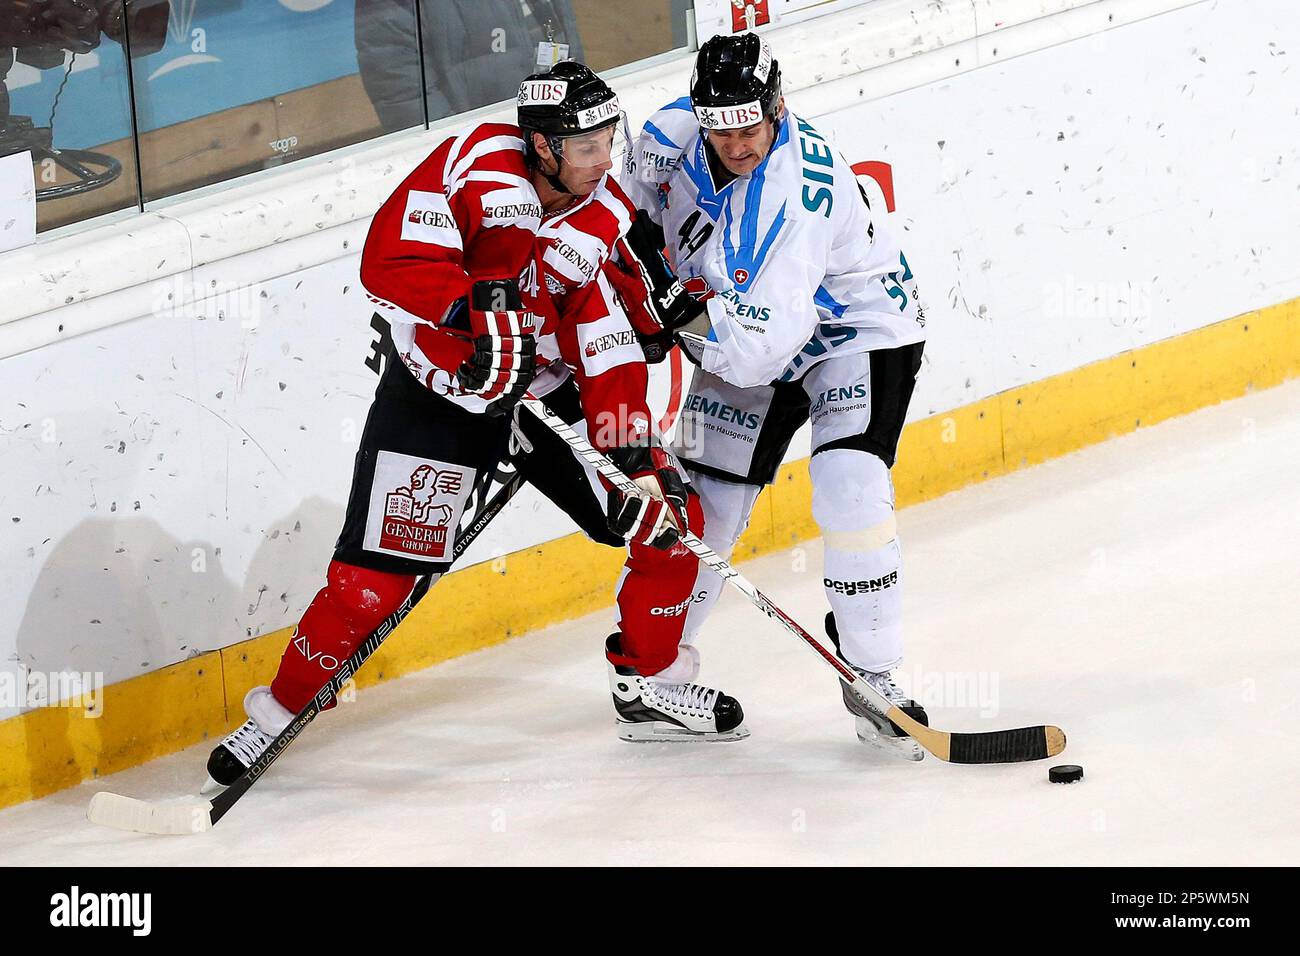 Team Canada's Ryan Smyth, left, vies for the puck with Fribourg's Shawn  Heins, right, during the semi-final match between Team Canada and HC  Fribourg Gotteron at the 86th Spengler Cup ice hockey tournament, in Davos,  Switzerland, Sunday, Dec. 30